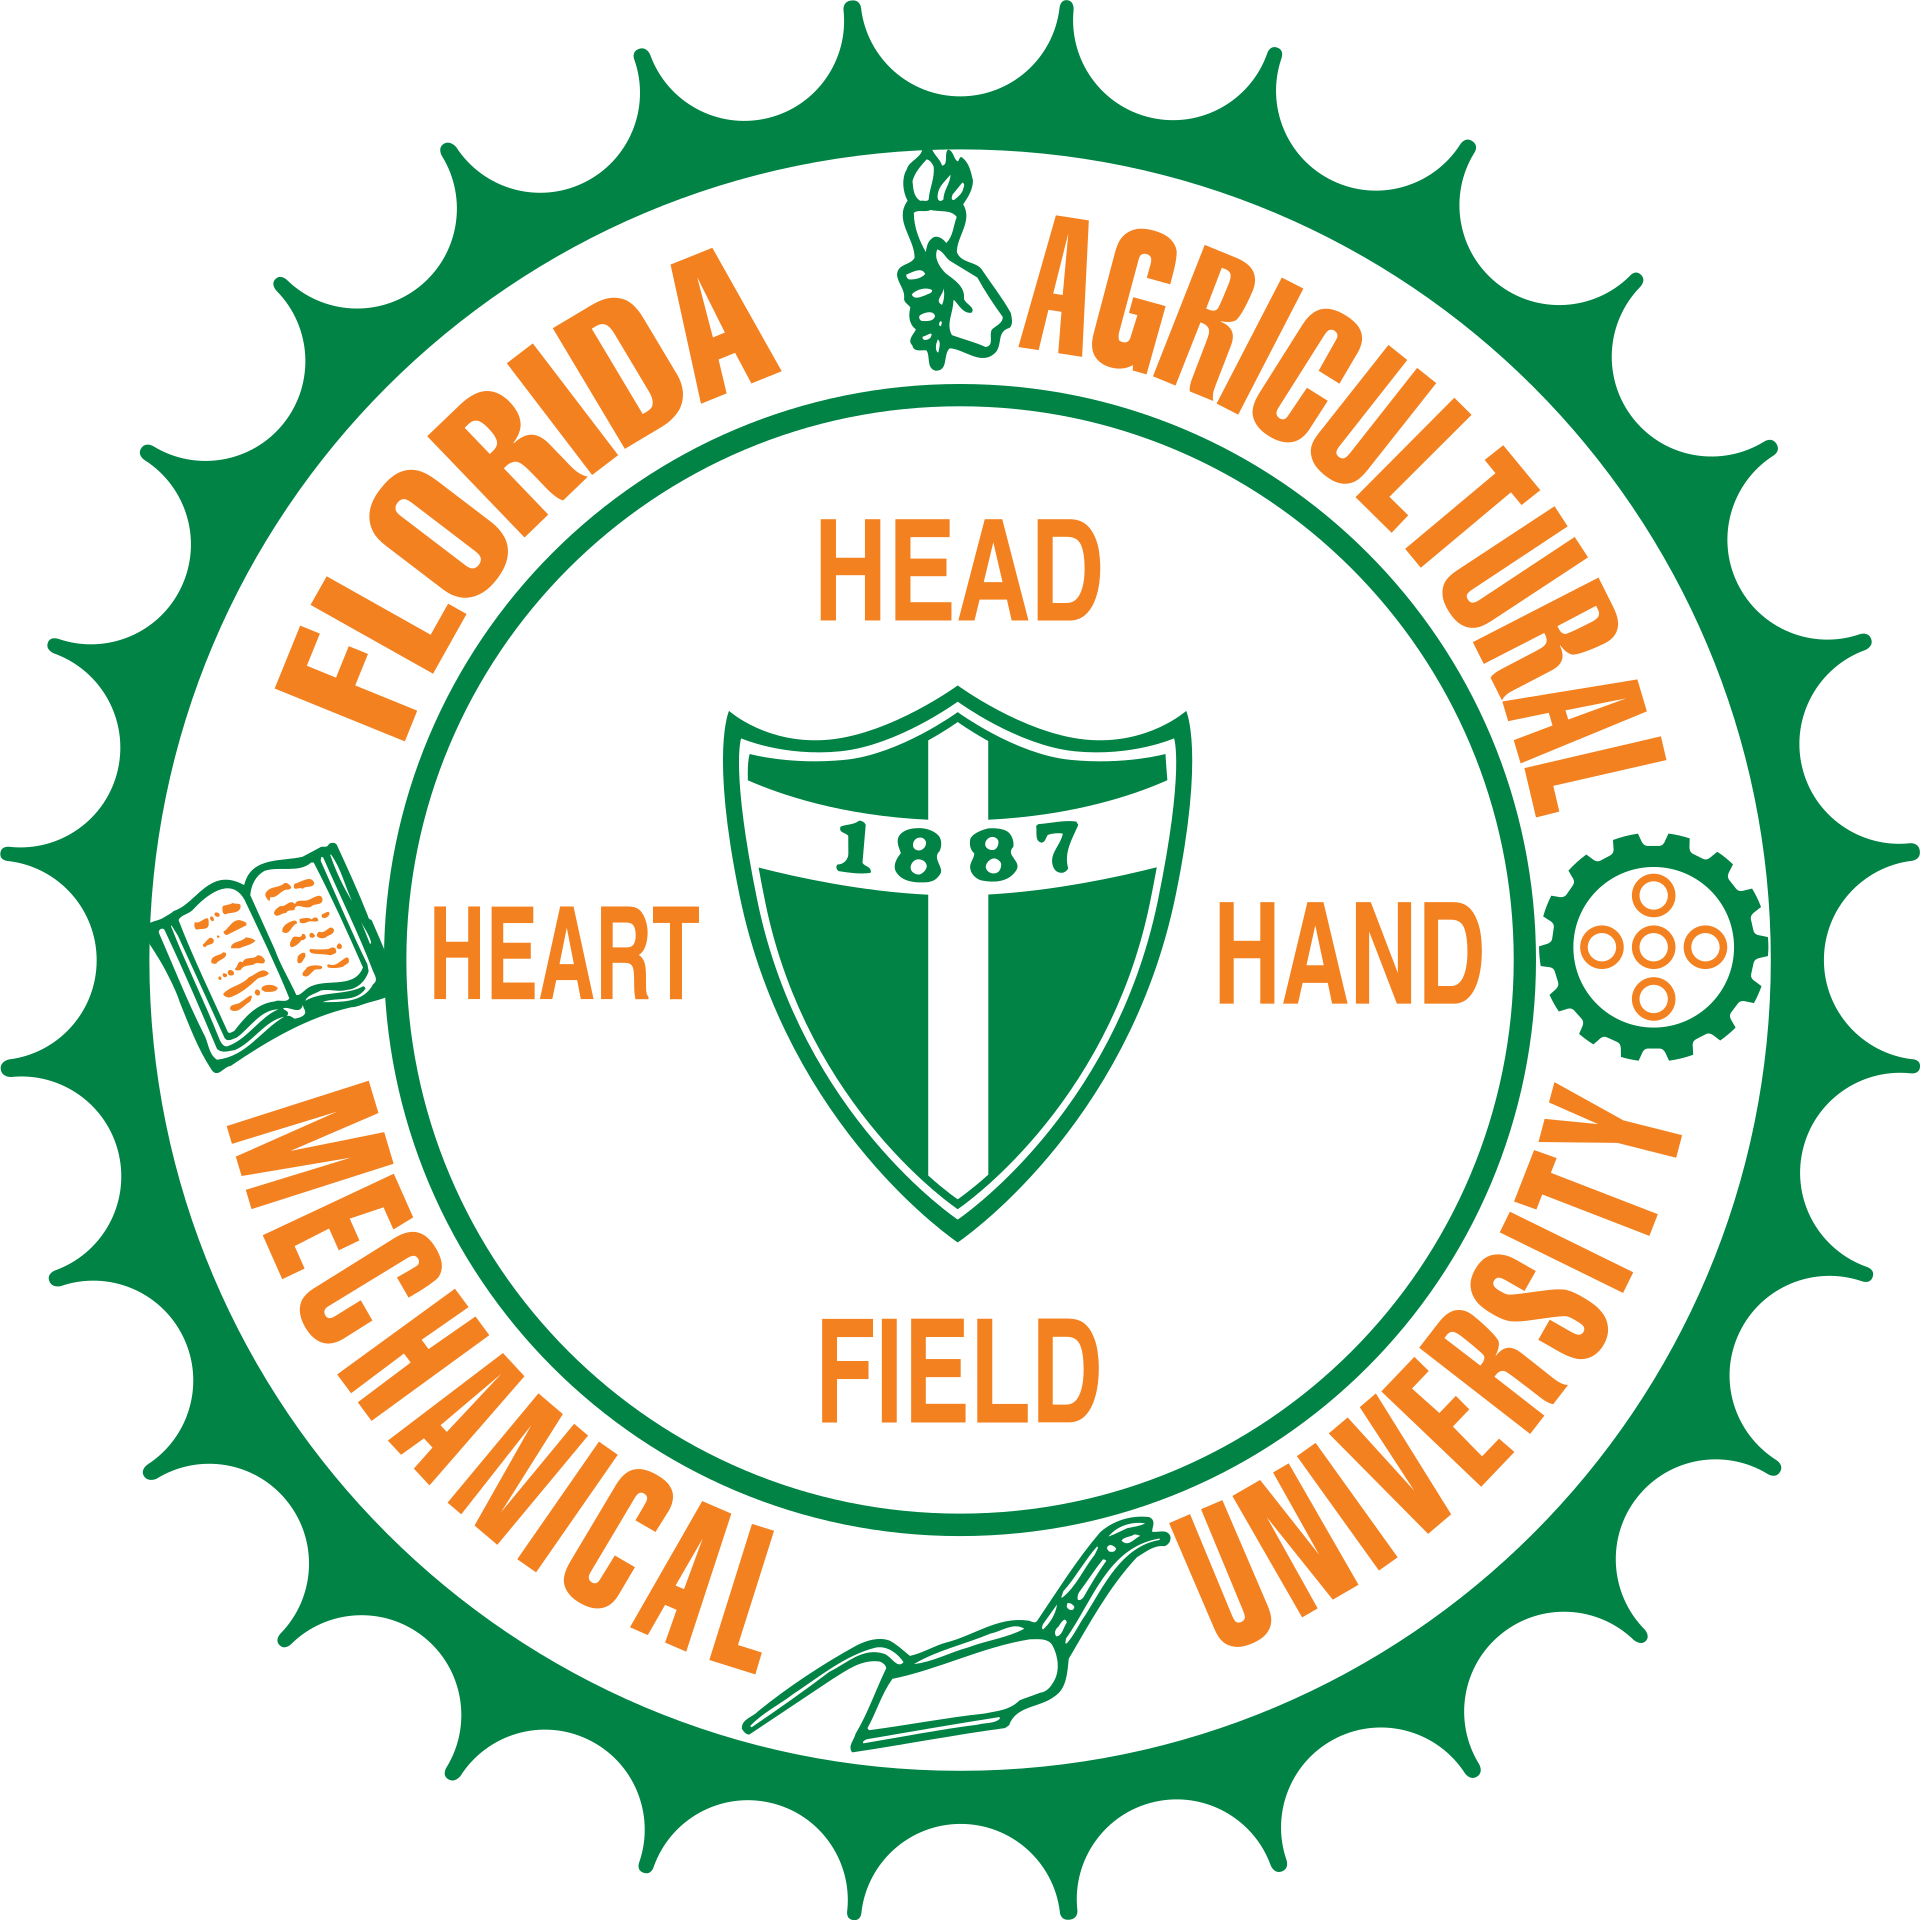 Florida Agricultural and Mechanical University logo